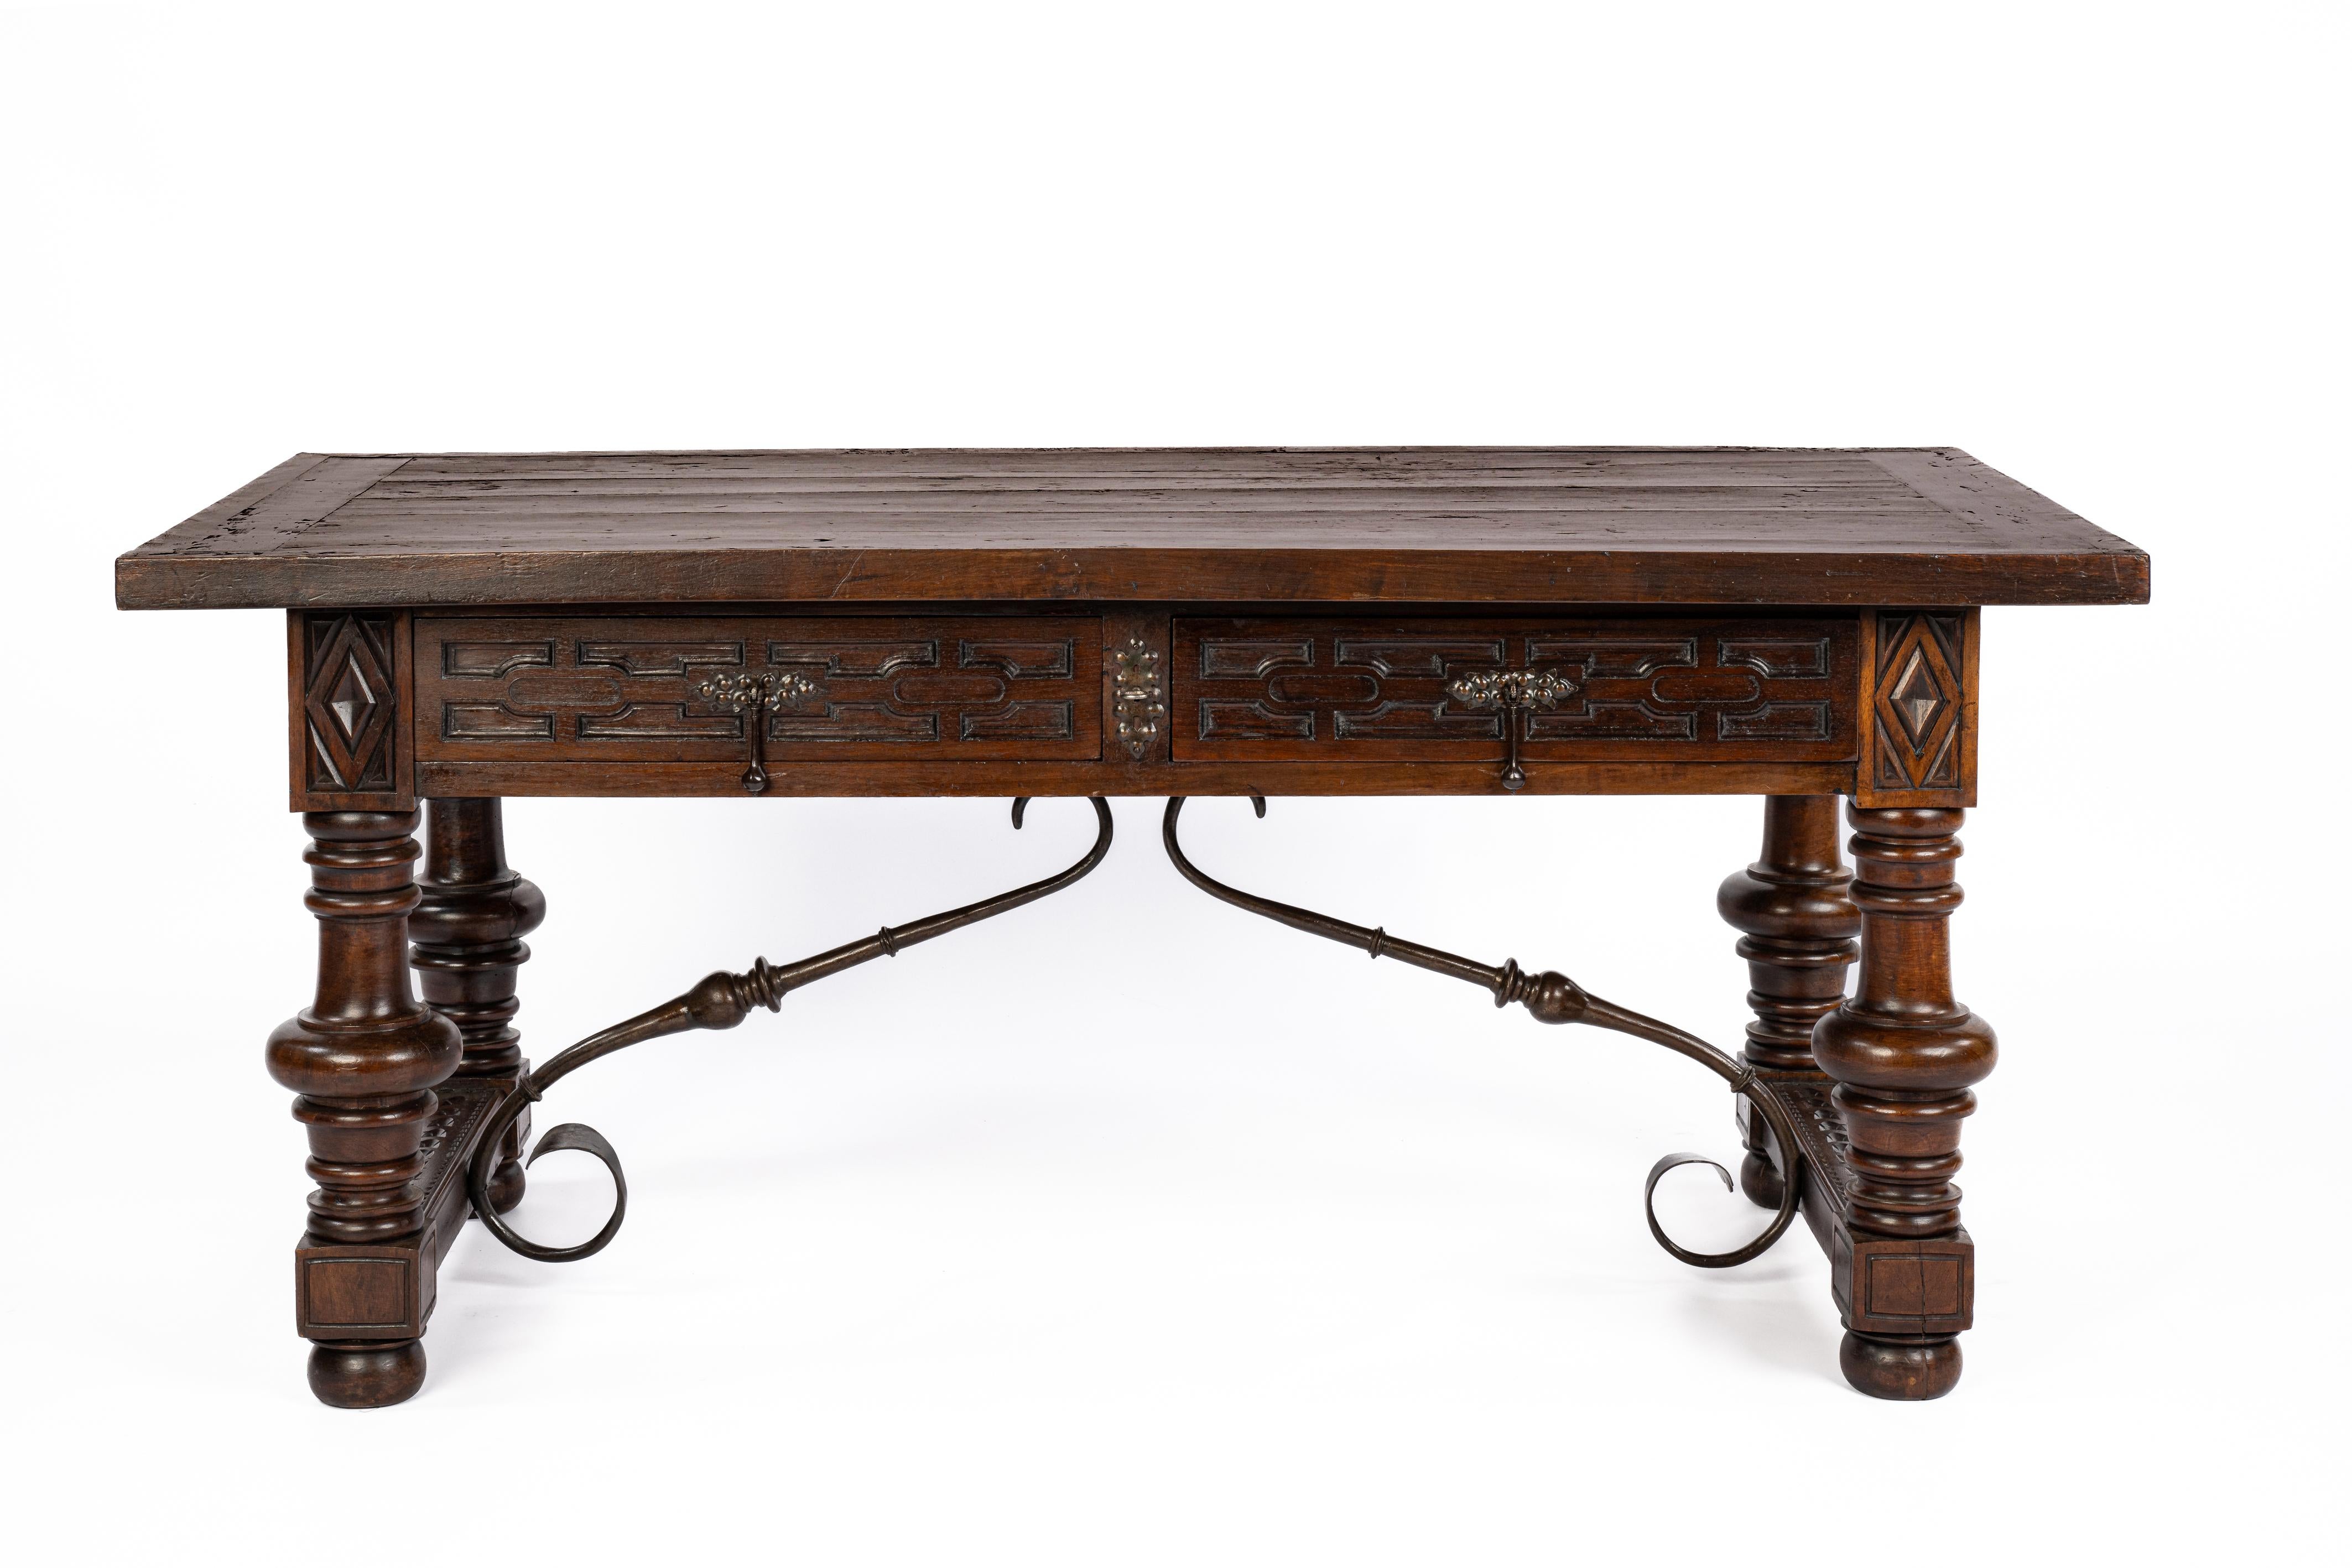 This beautiful antique late 19th-century Spanish Baroque desk or writing table is made of solid chestnut wood with bold-turned legs joined by wrought iron stretchers. The table features two drawers with a geometric carved front and forged steel drop